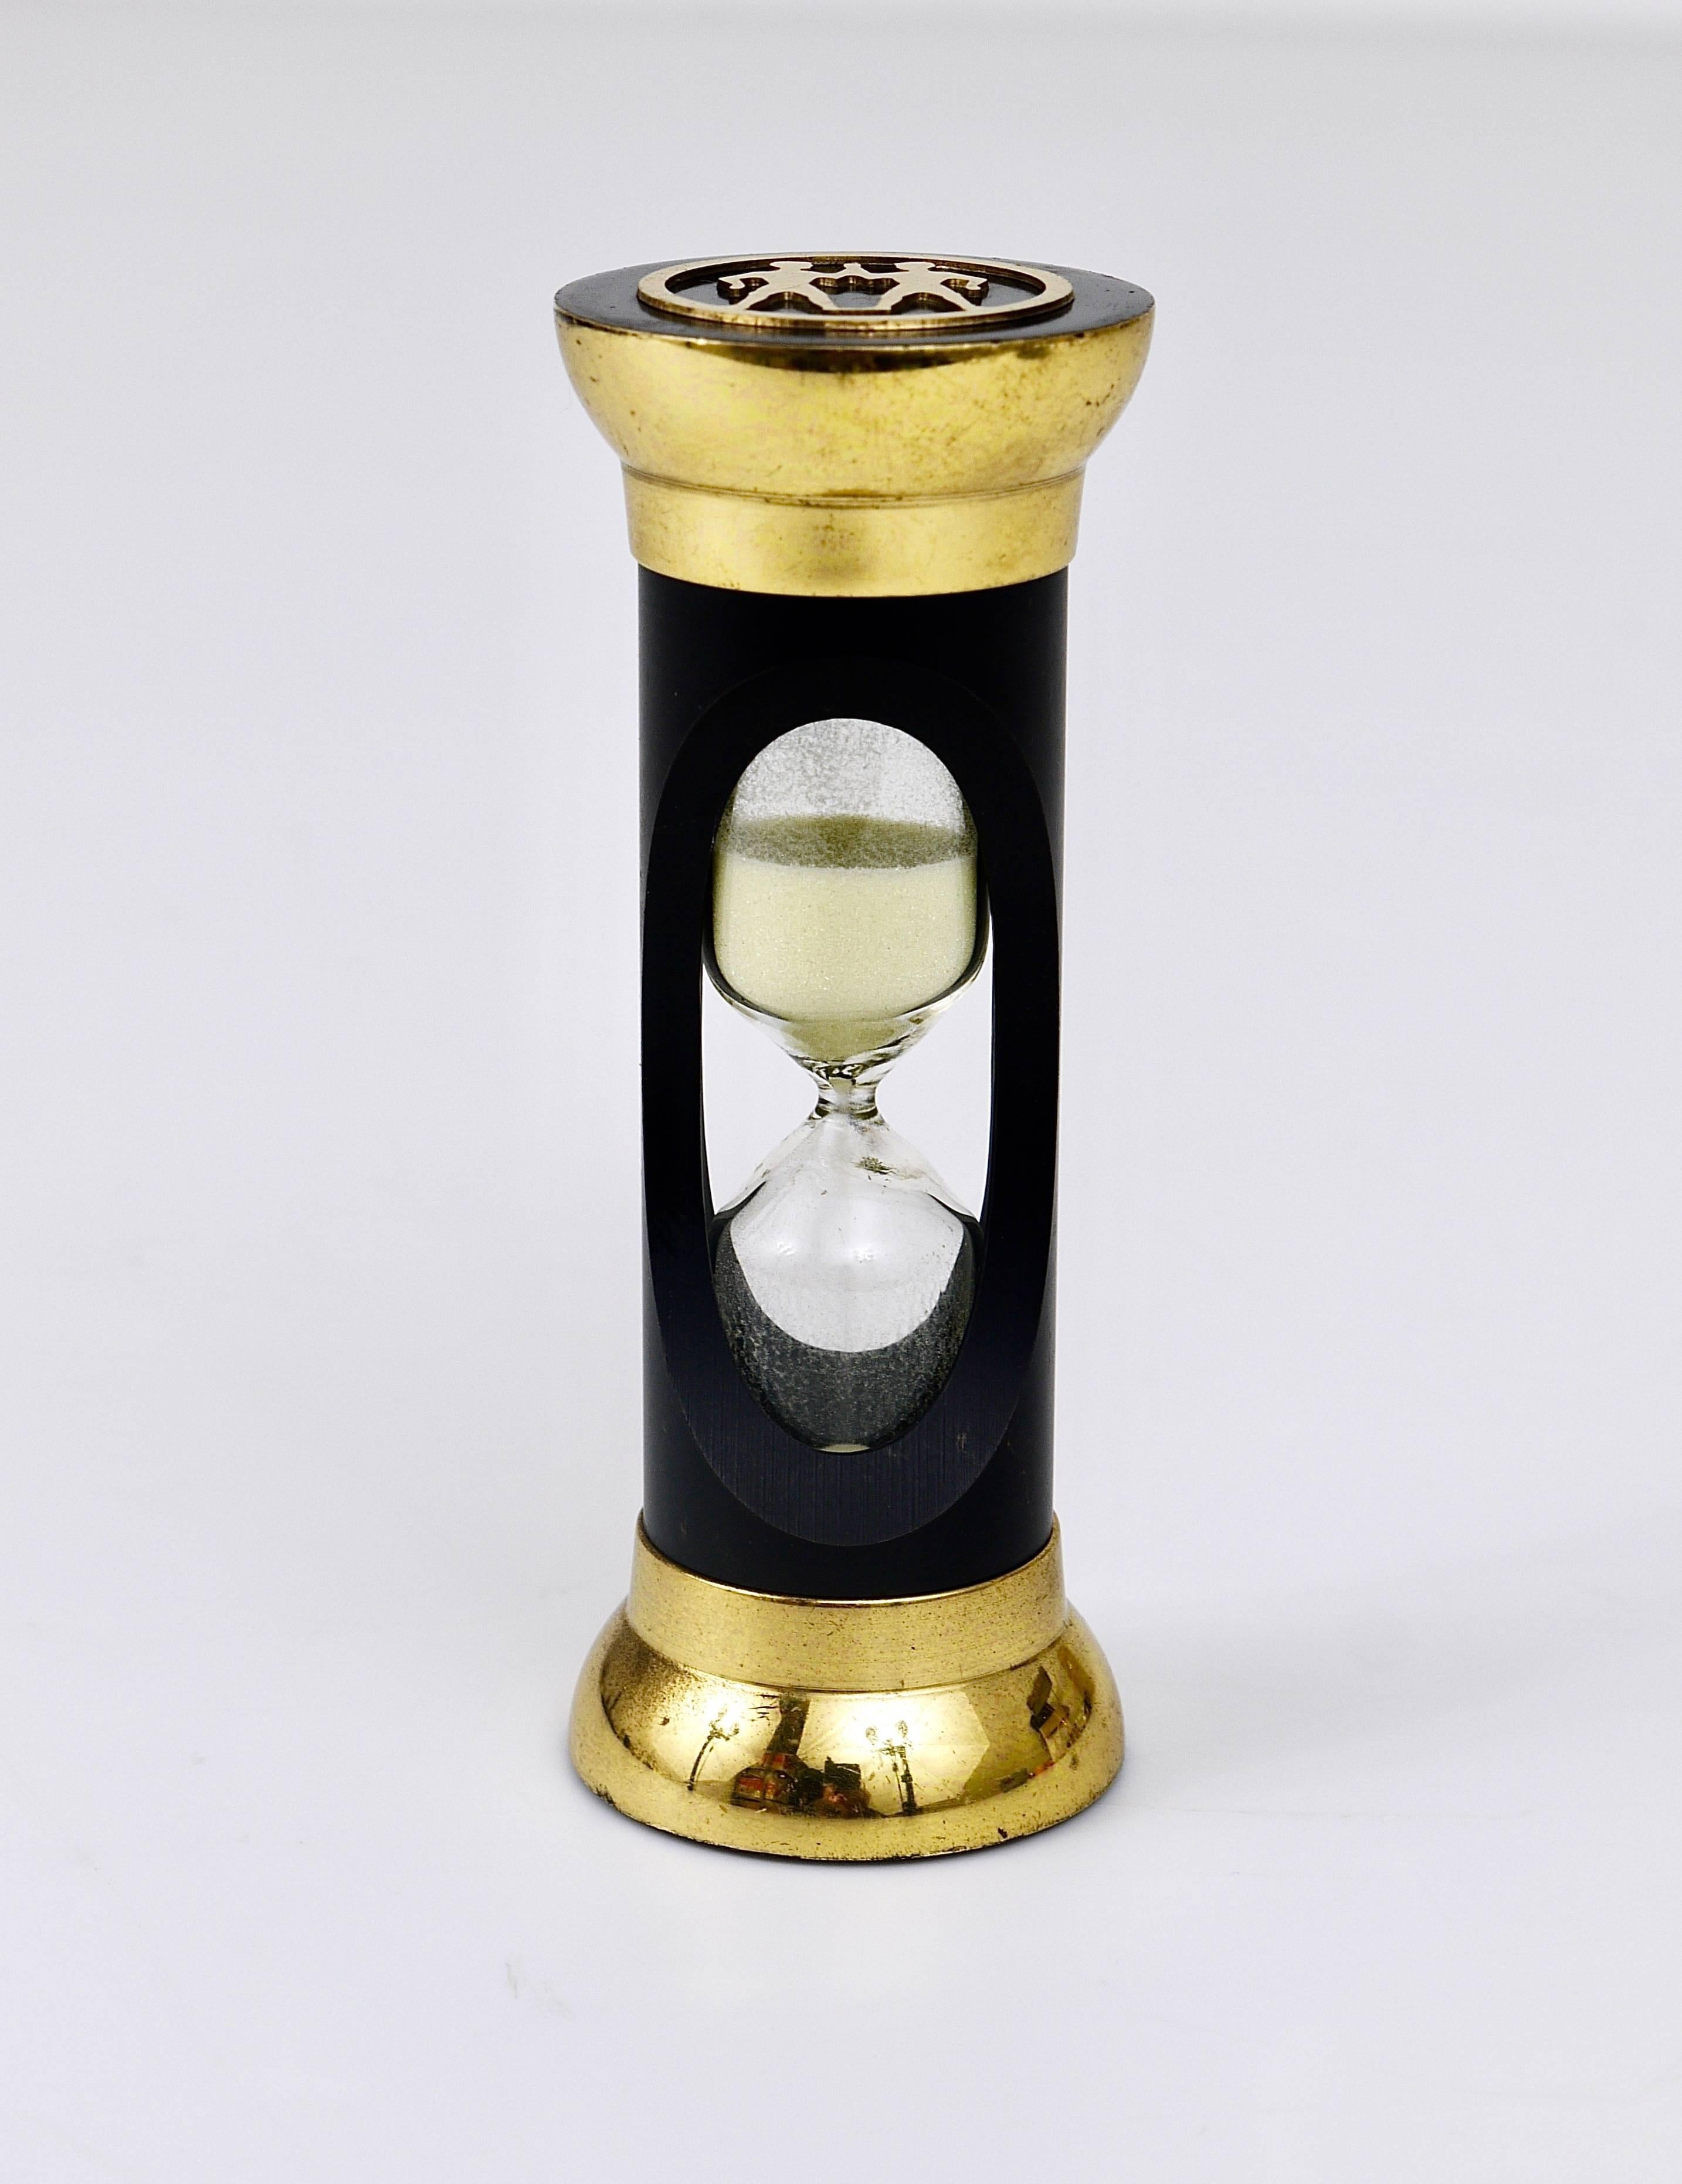 A beautiful modernist hour glass / sand timer, made of brass, displaying the zodiac sign twins, Austria, 1950s, designed by Walter Bosse, executed by Hertha Baller. In very good condition, marginal wear. We offer more Walter Bosse objects in our